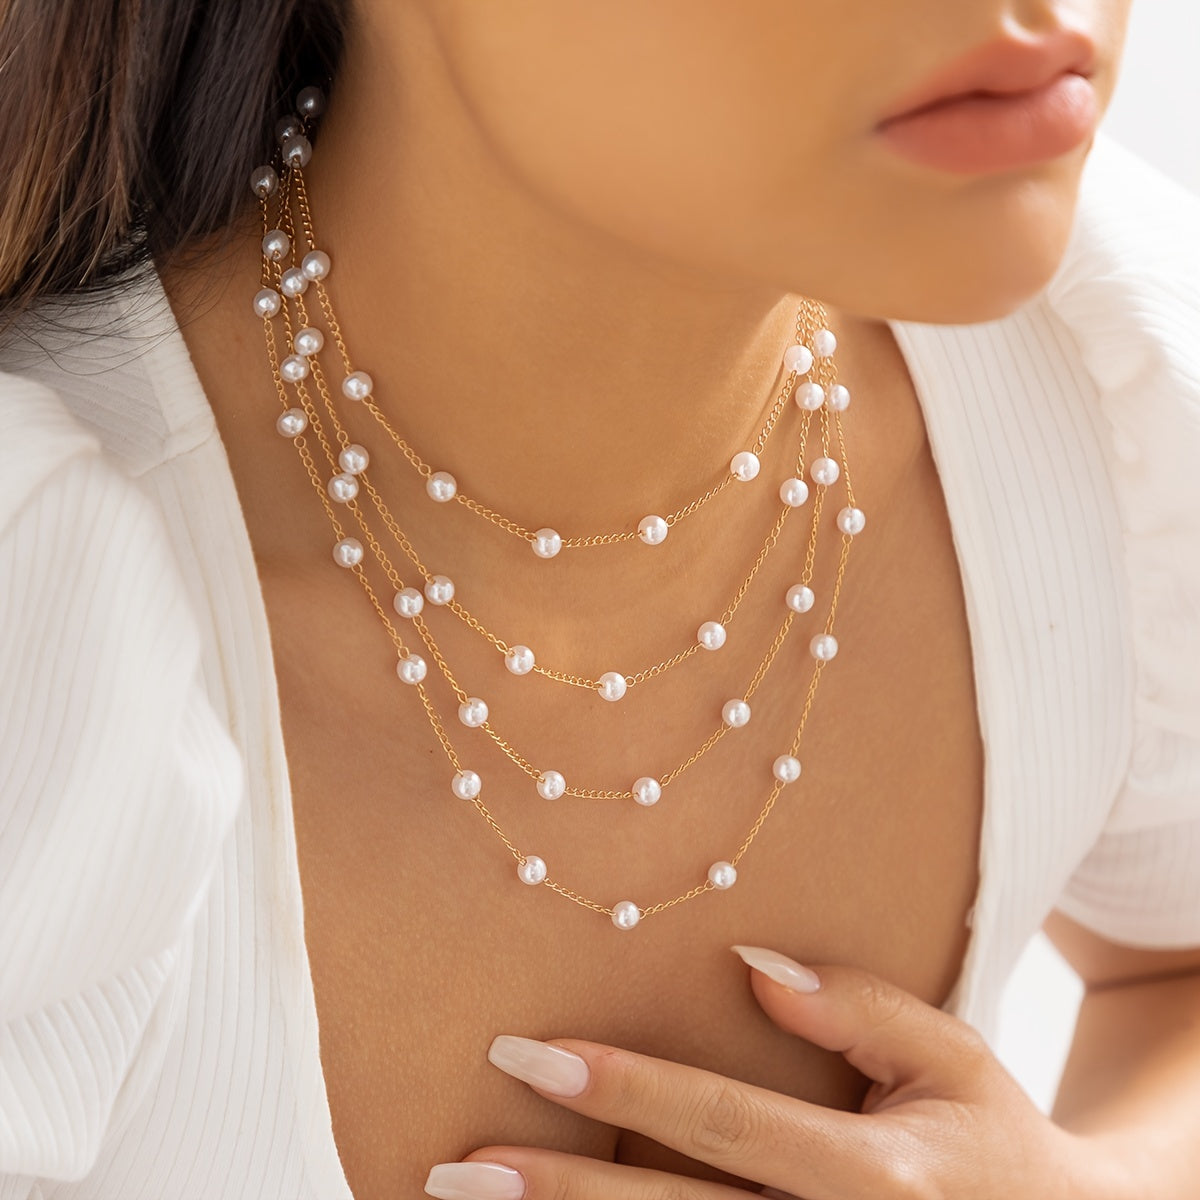 Elegant Multilayer Faux Pearl Necklace for Women - Perfect for Parties and Gifts